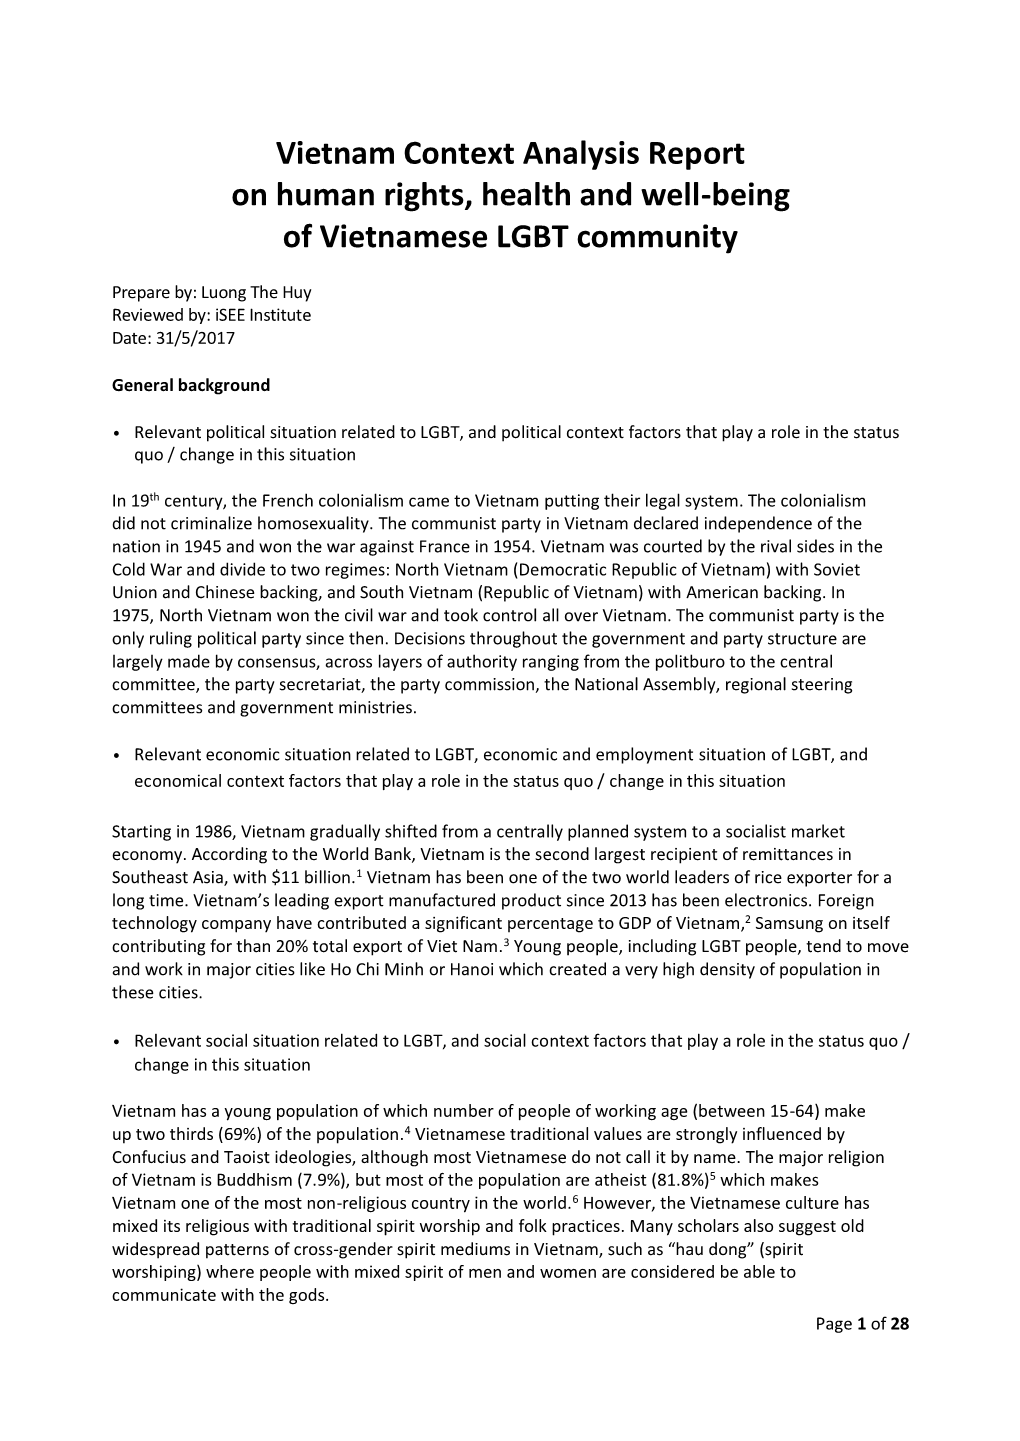 Vietnam Context Analysis Report on Human Rights, Health and Well-Being of Vietnamese LGBT Community